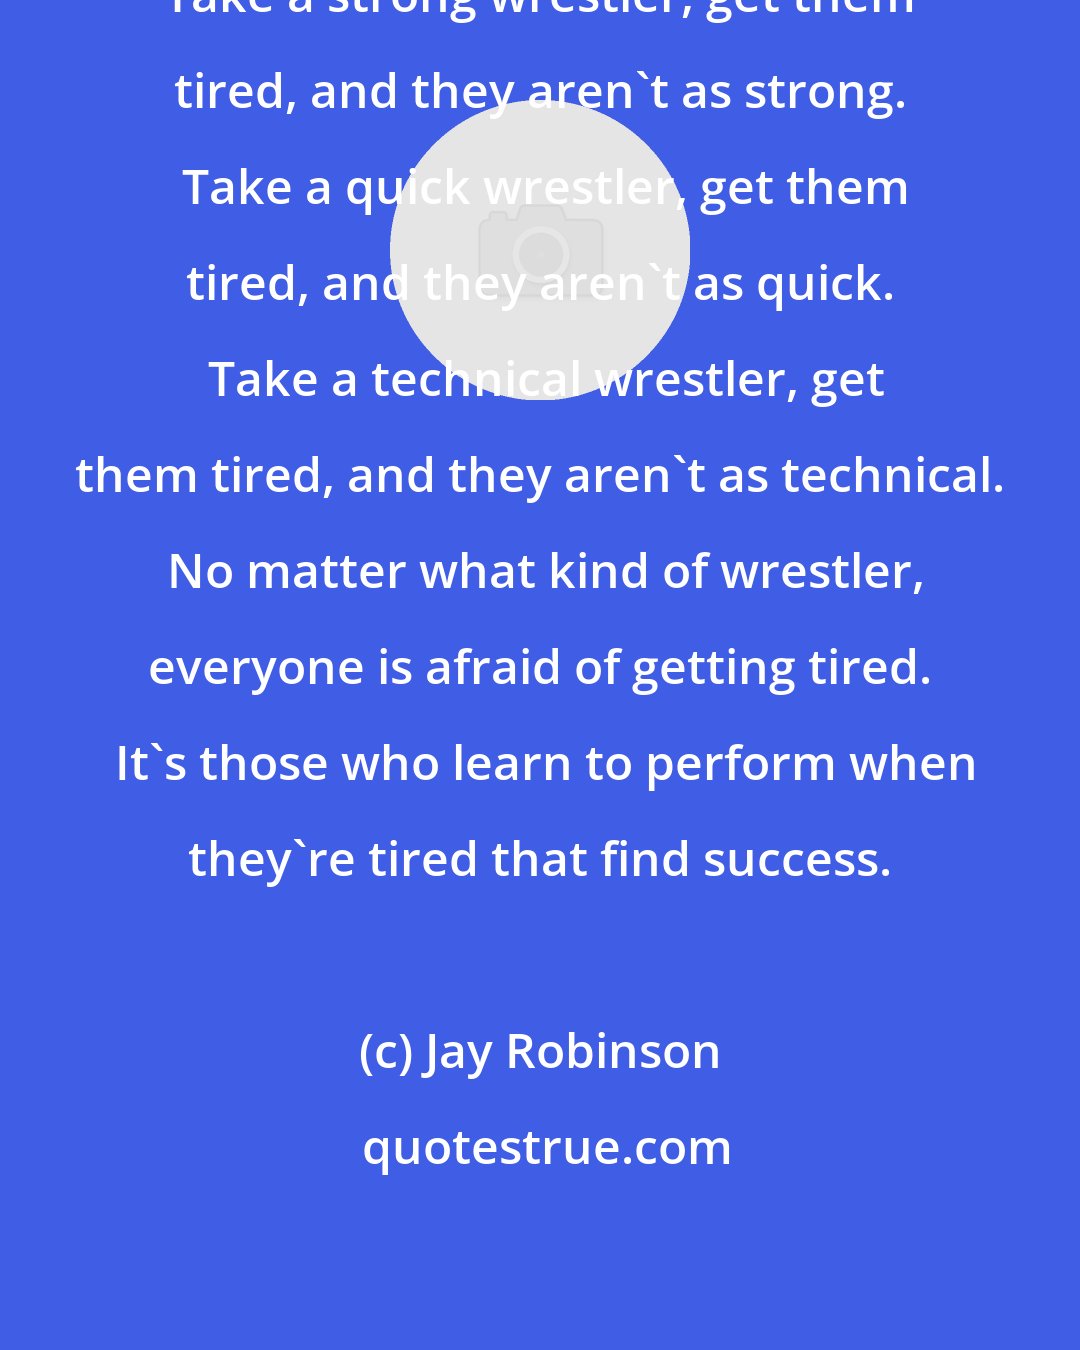 Jay Robinson: Take a strong wrestler, get them tired, and they aren't as strong.  Take a quick wrestler, get them tired, and they aren't as quick.  Take a technical wrestler, get them tired, and they aren't as technical.  No matter what kind of wrestler, everyone is afraid of getting tired.  It's those who learn to perform when they're tired that find success.